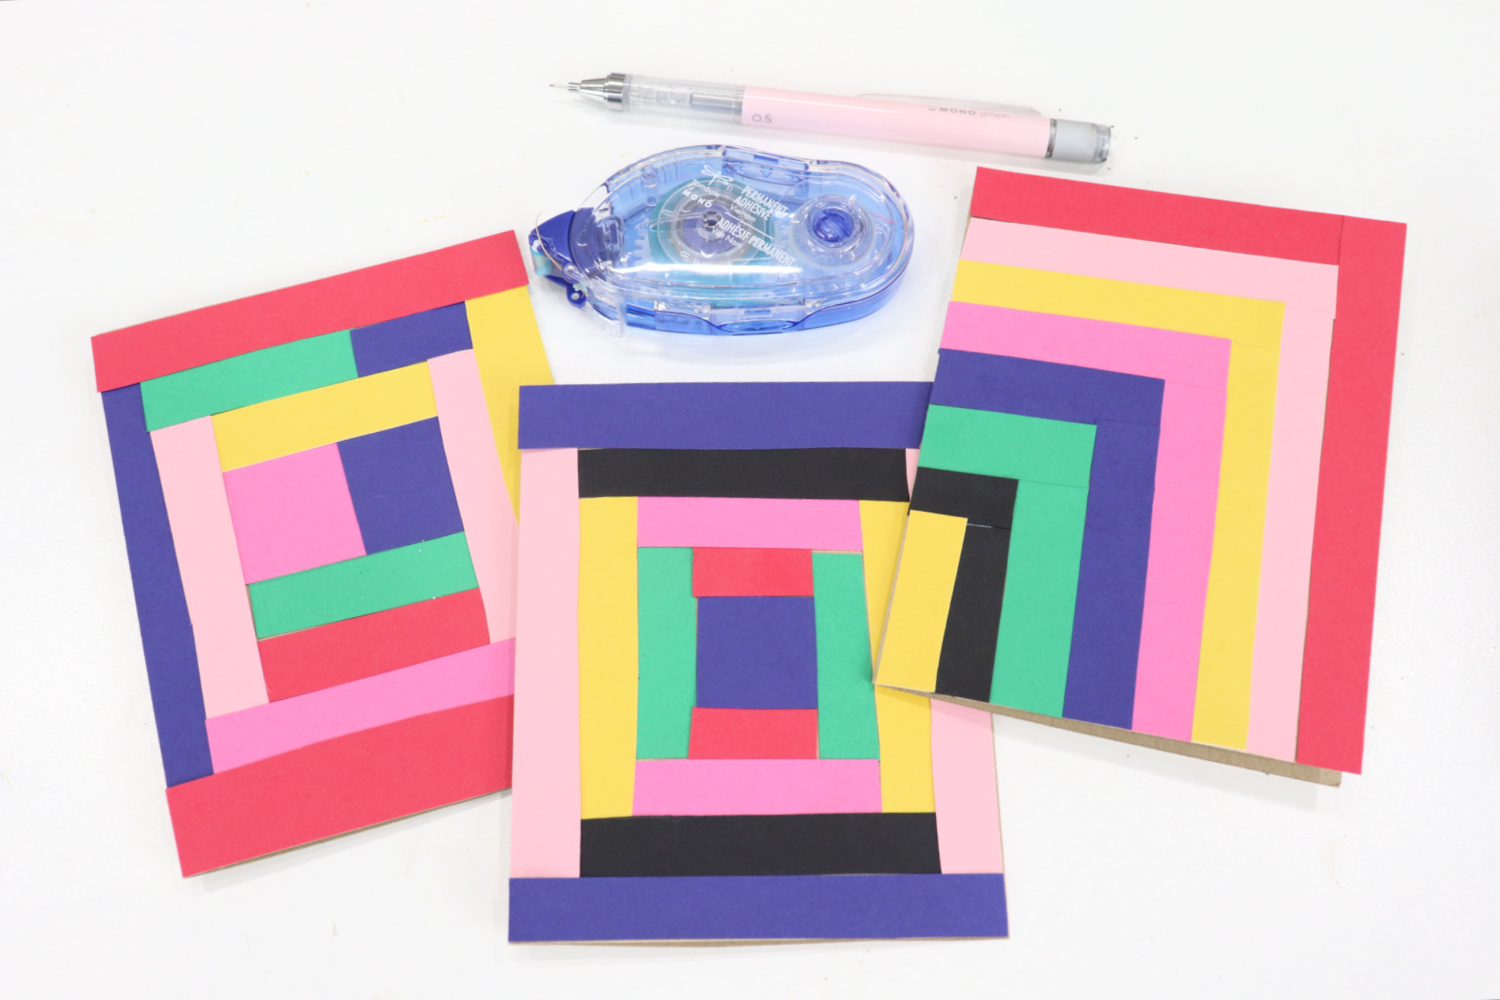 Image contains three quilt inspired cards decorated with colorful strips of cardstock. A blue permanent adhesive runner and a pink MONO Graph Mechanical Pencil sit nearby on a white tabletop.